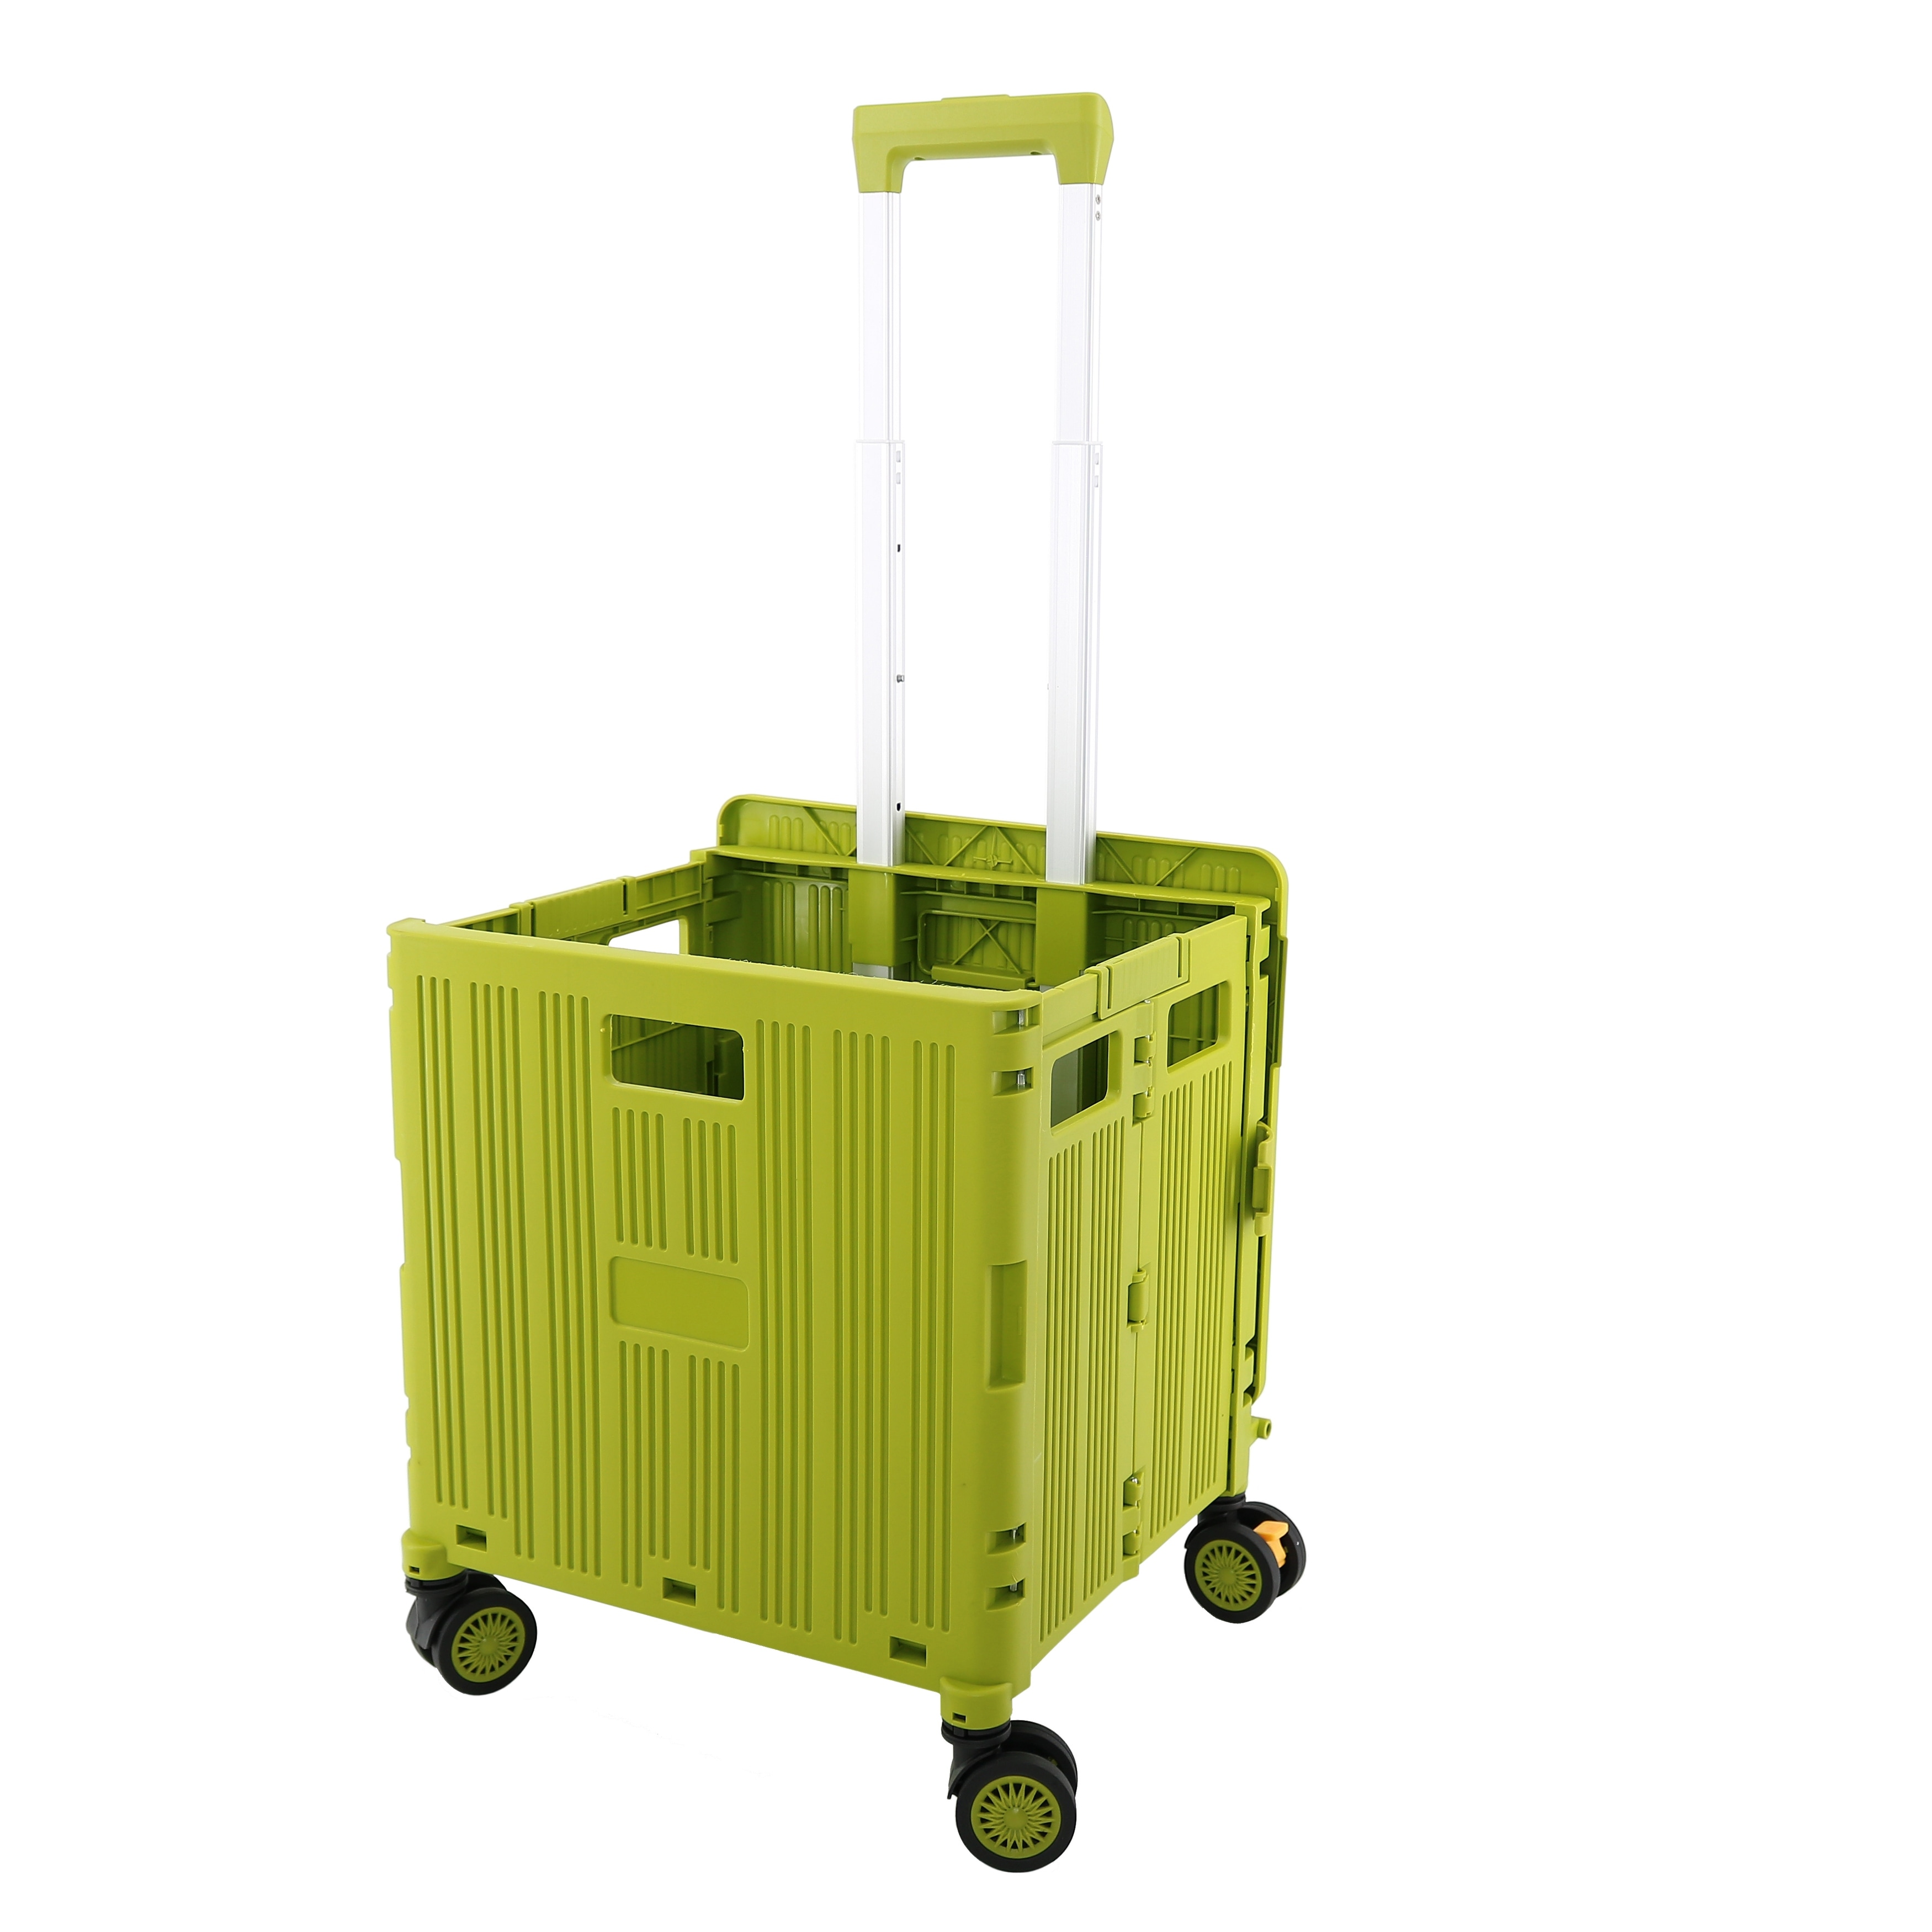 Folding crate with handle